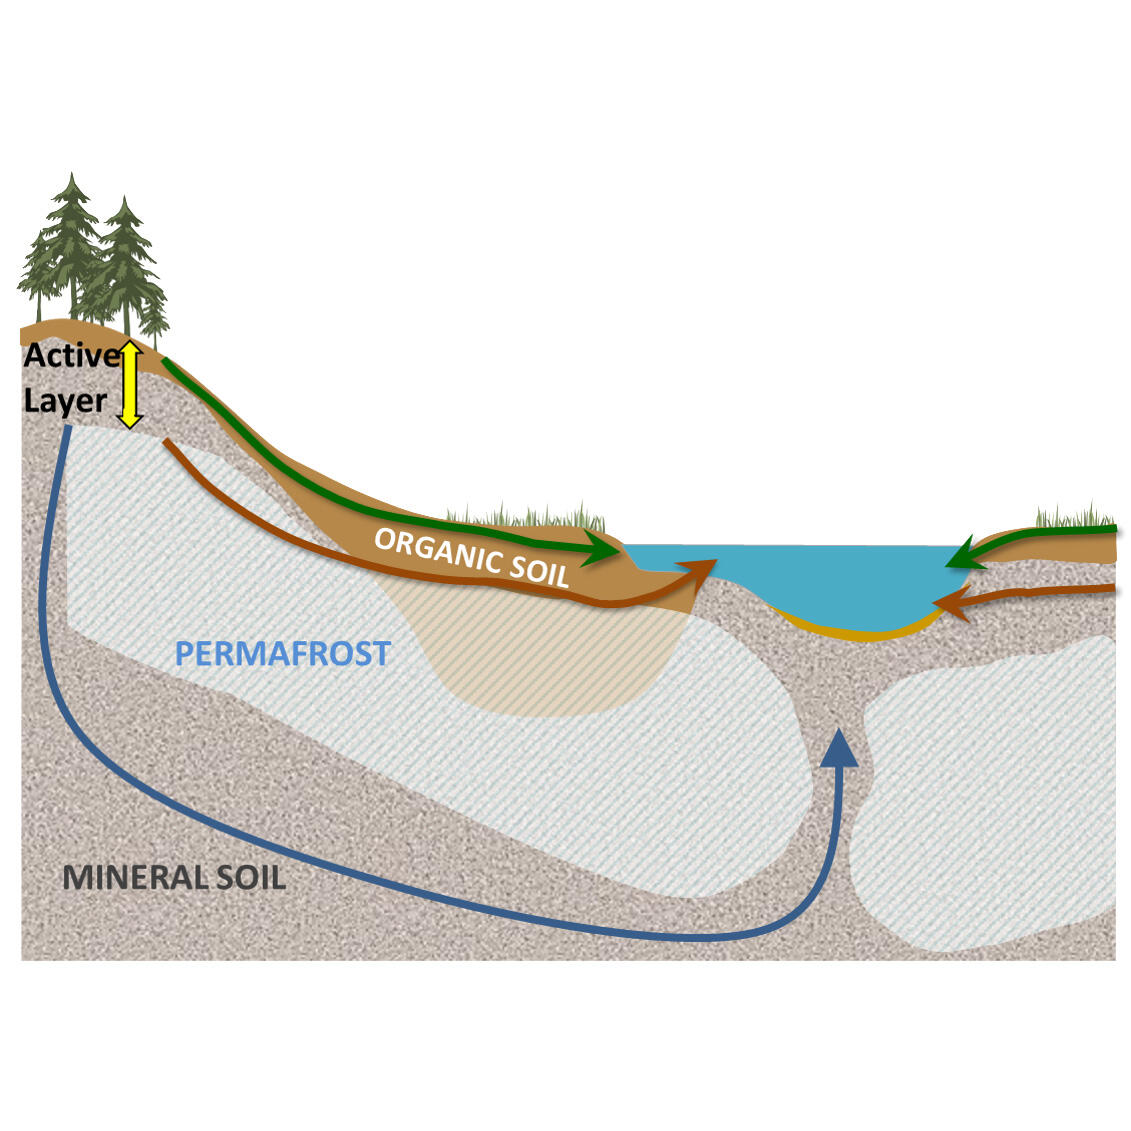 A conceptual model of effect of permafrost on catchment hydrology.